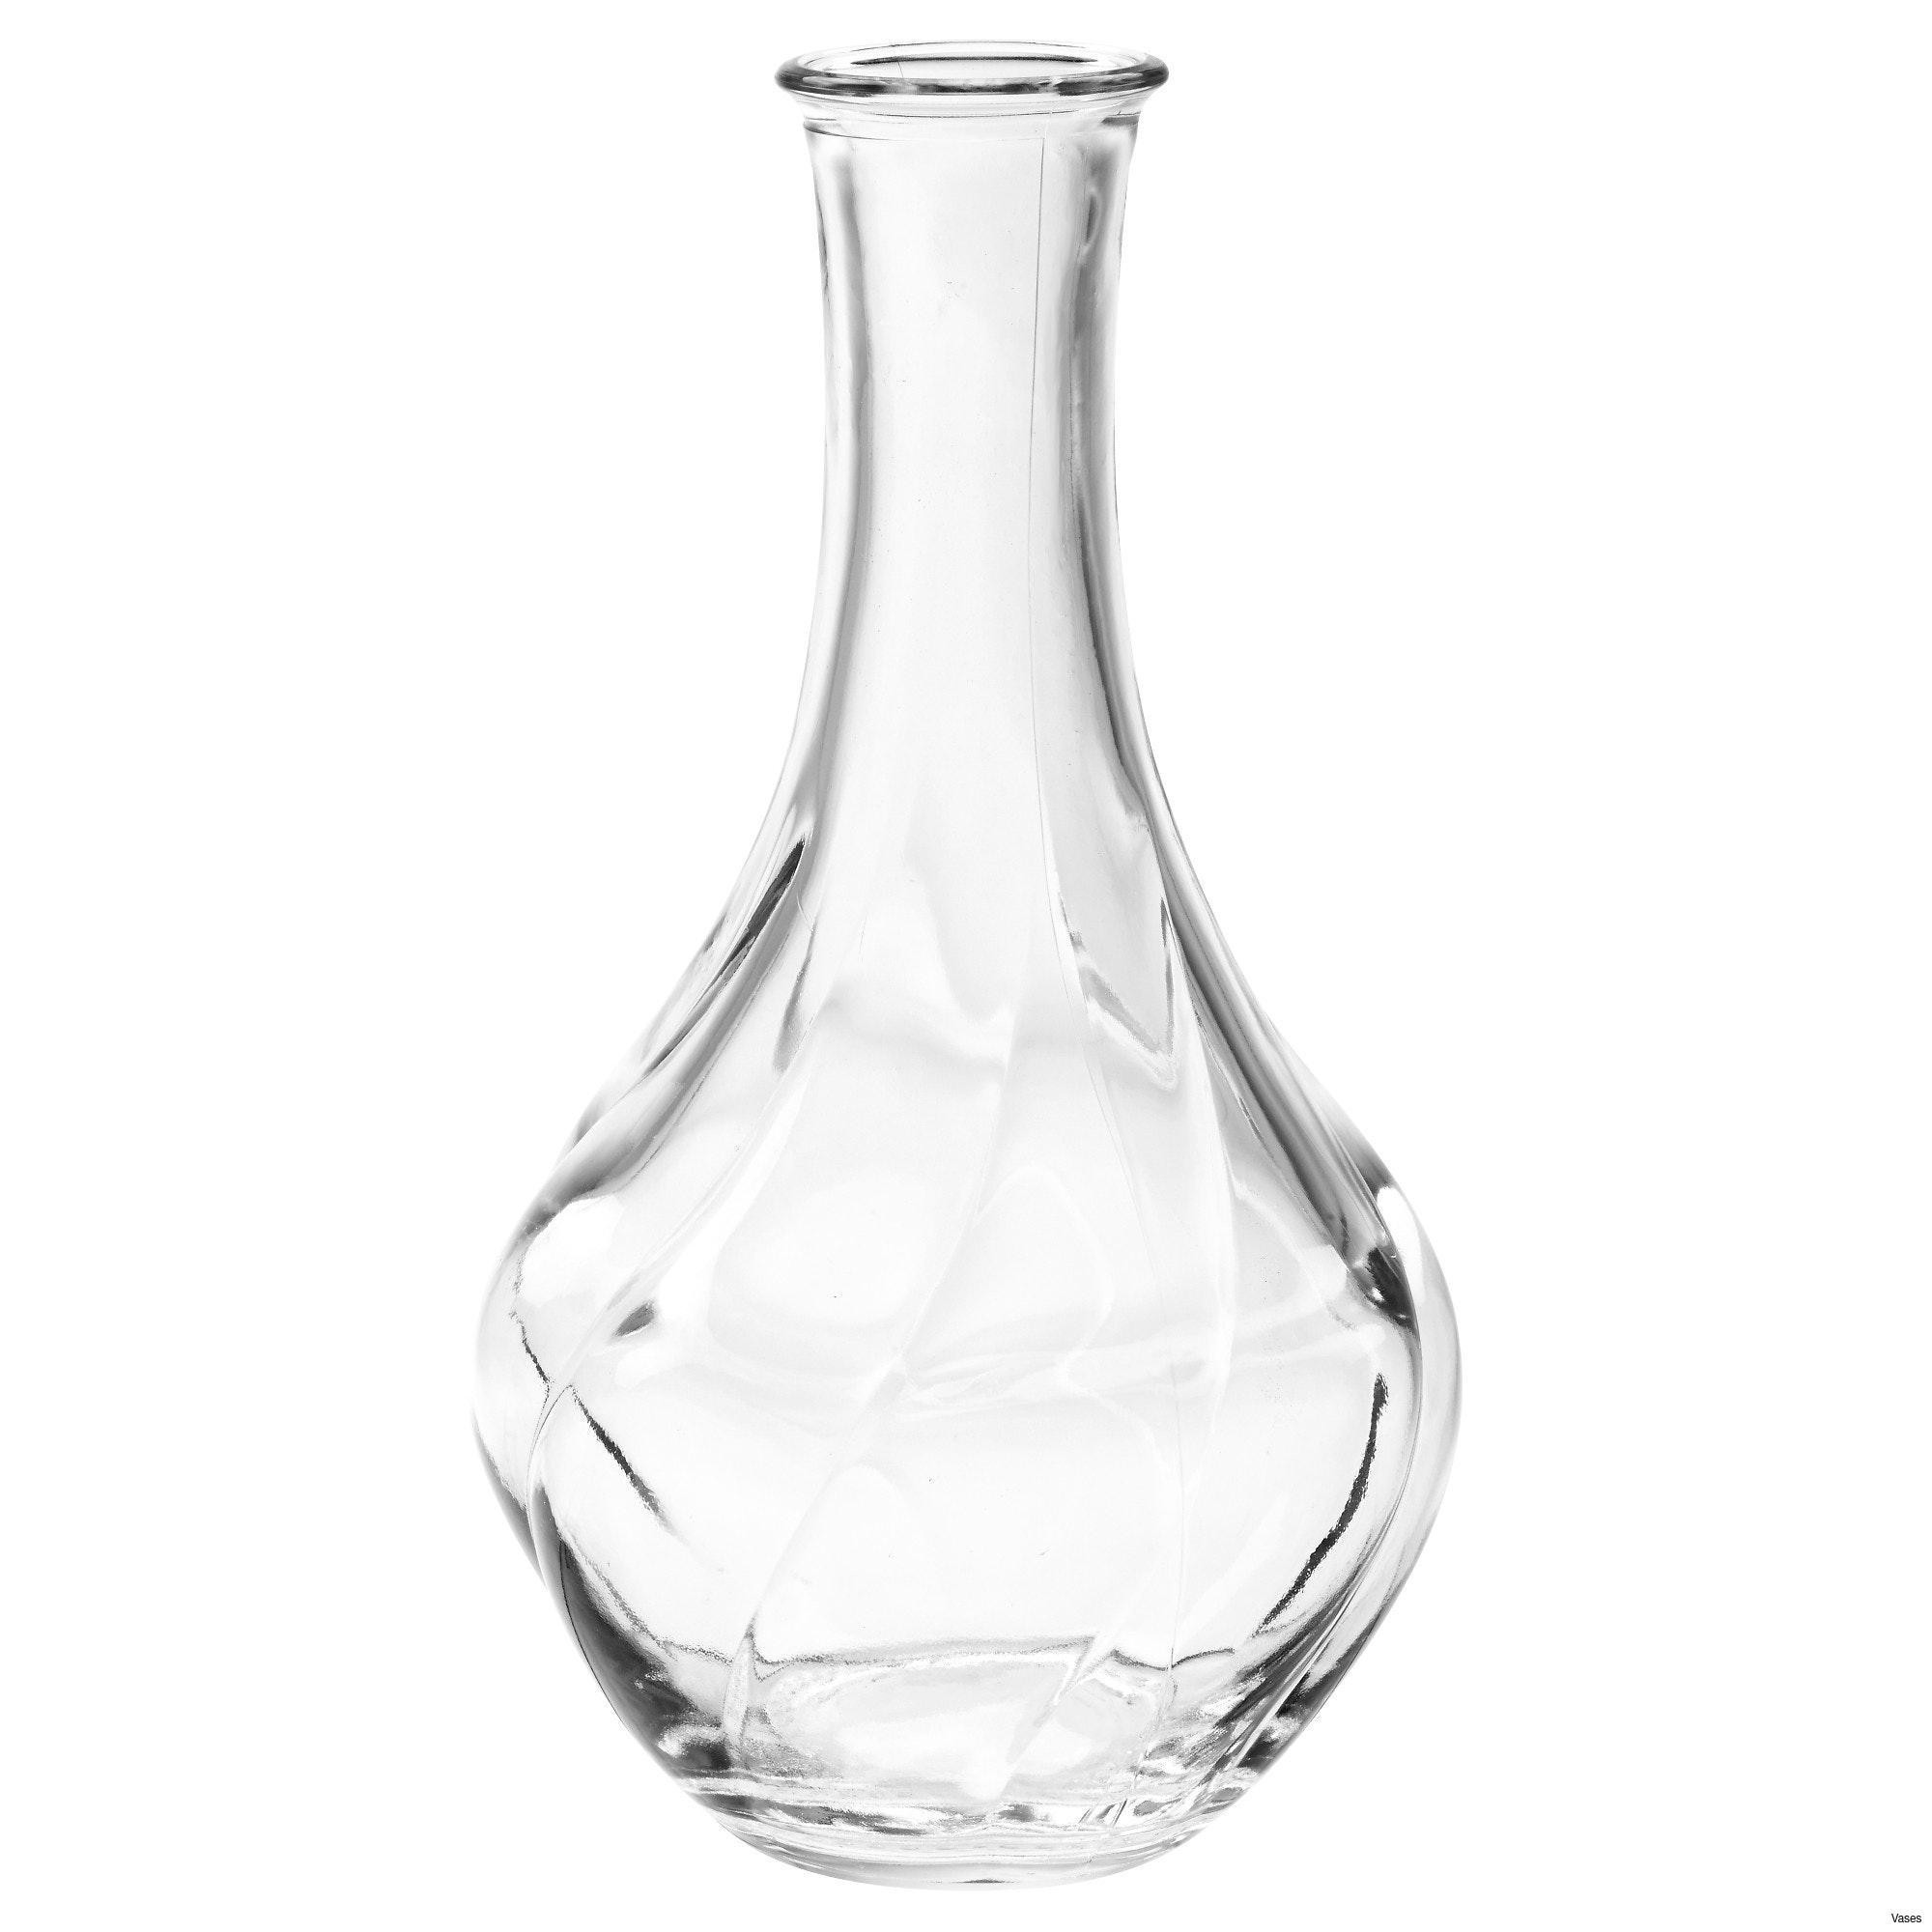 21 Best Modern Glass Vase 2024 free download modern glass vase of large white vases photos living room glass vases fresh clear vase 0d inside large white vases photos living room glass vases fresh clear vase 0d tags amazing and of